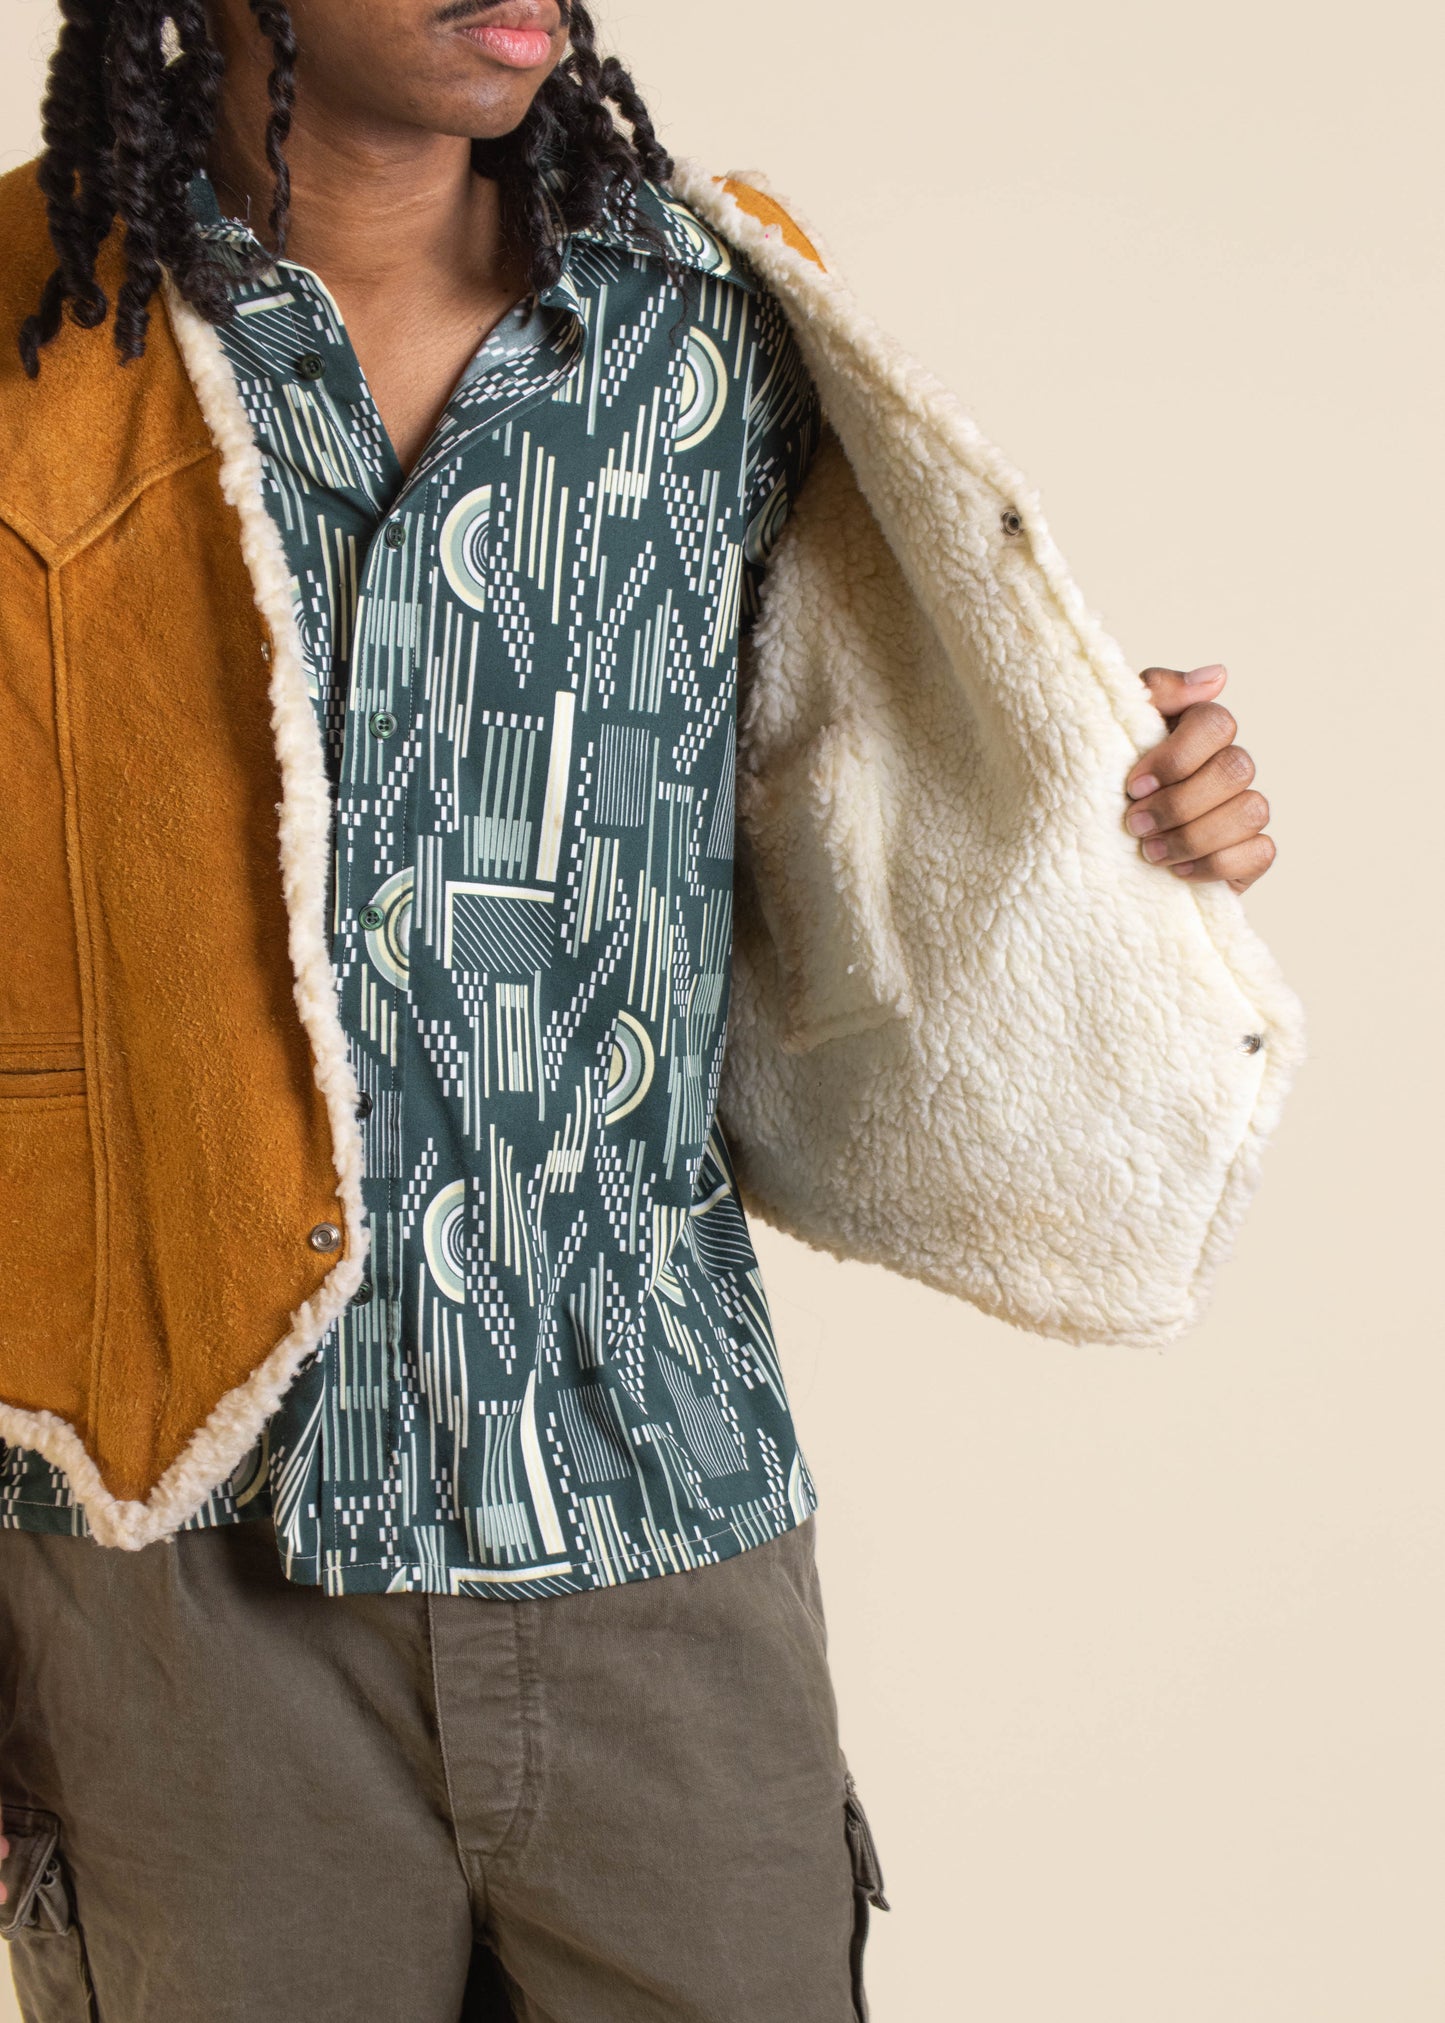 1970s LLB Sherpa Lined Suede Vest Size M/L